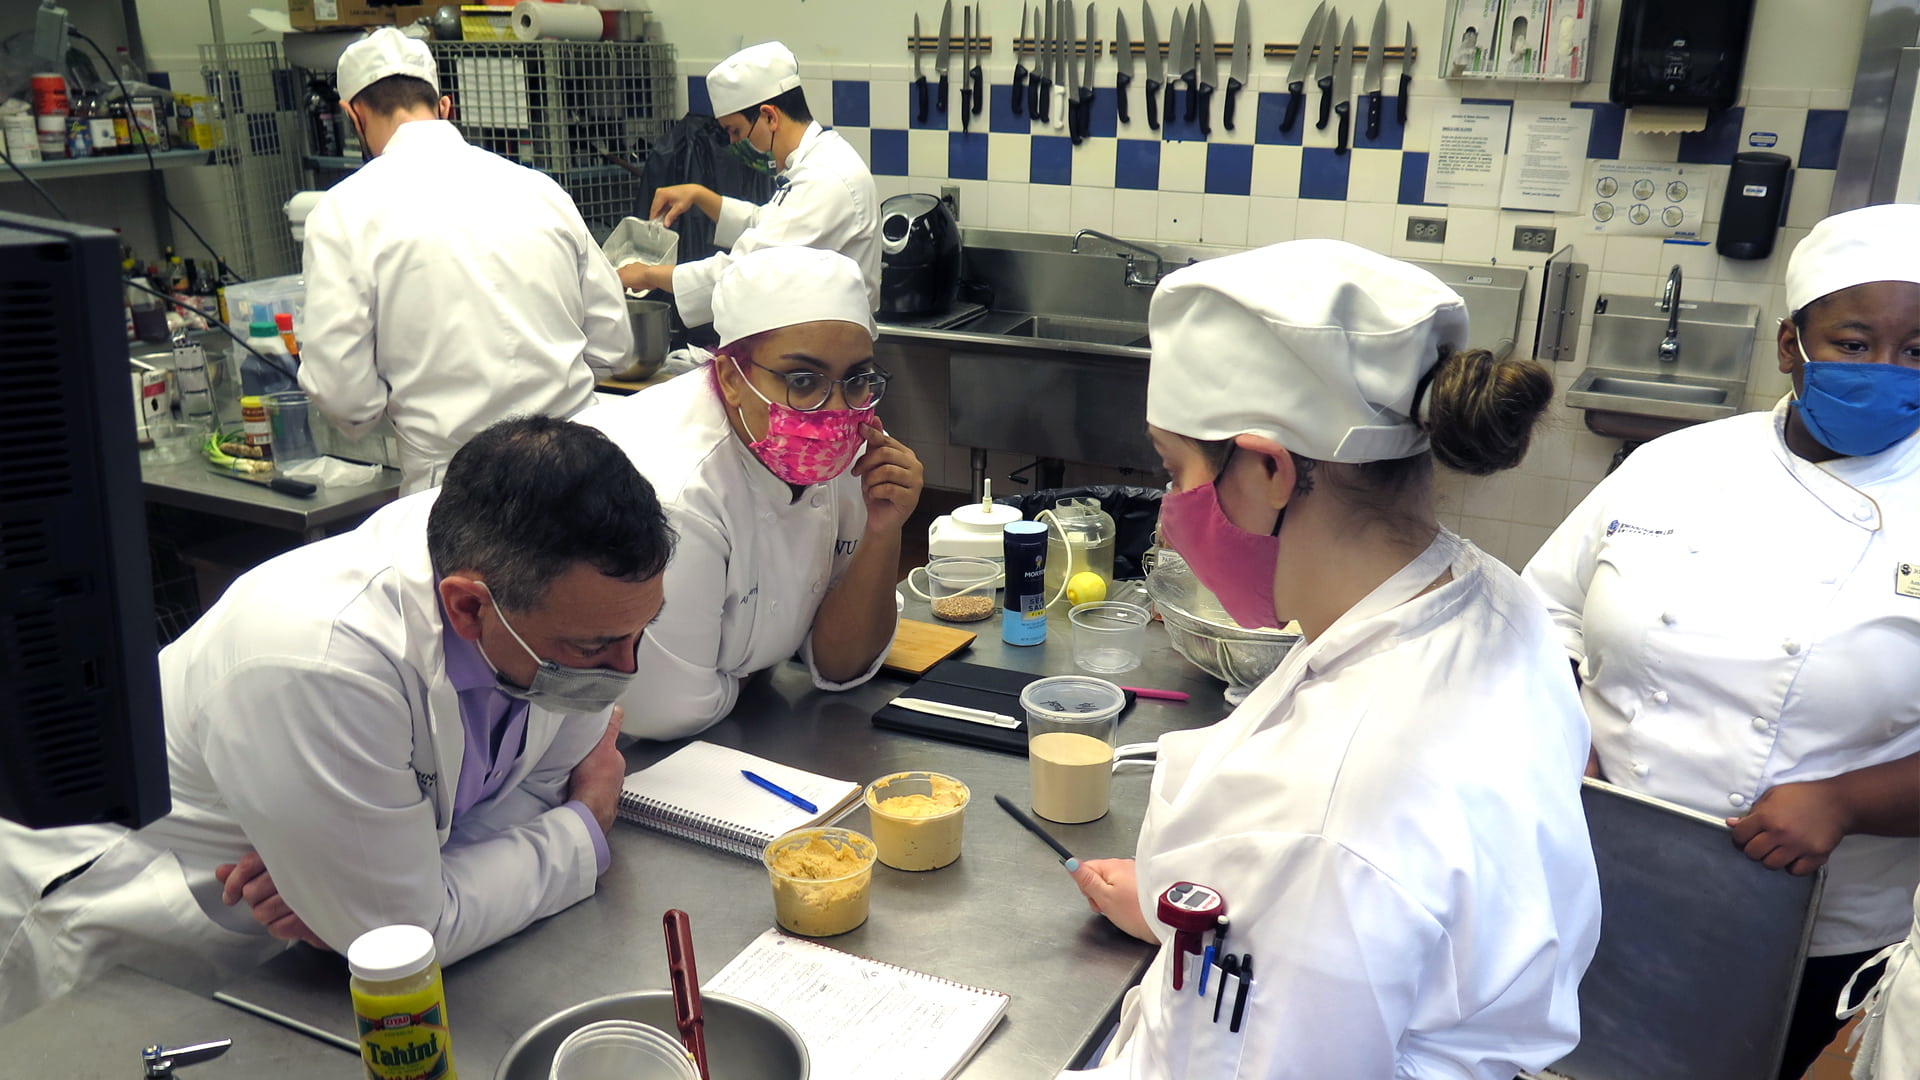 JWU Charlotte Applied Food Science students working on the Acme Smoked Fish challenge.